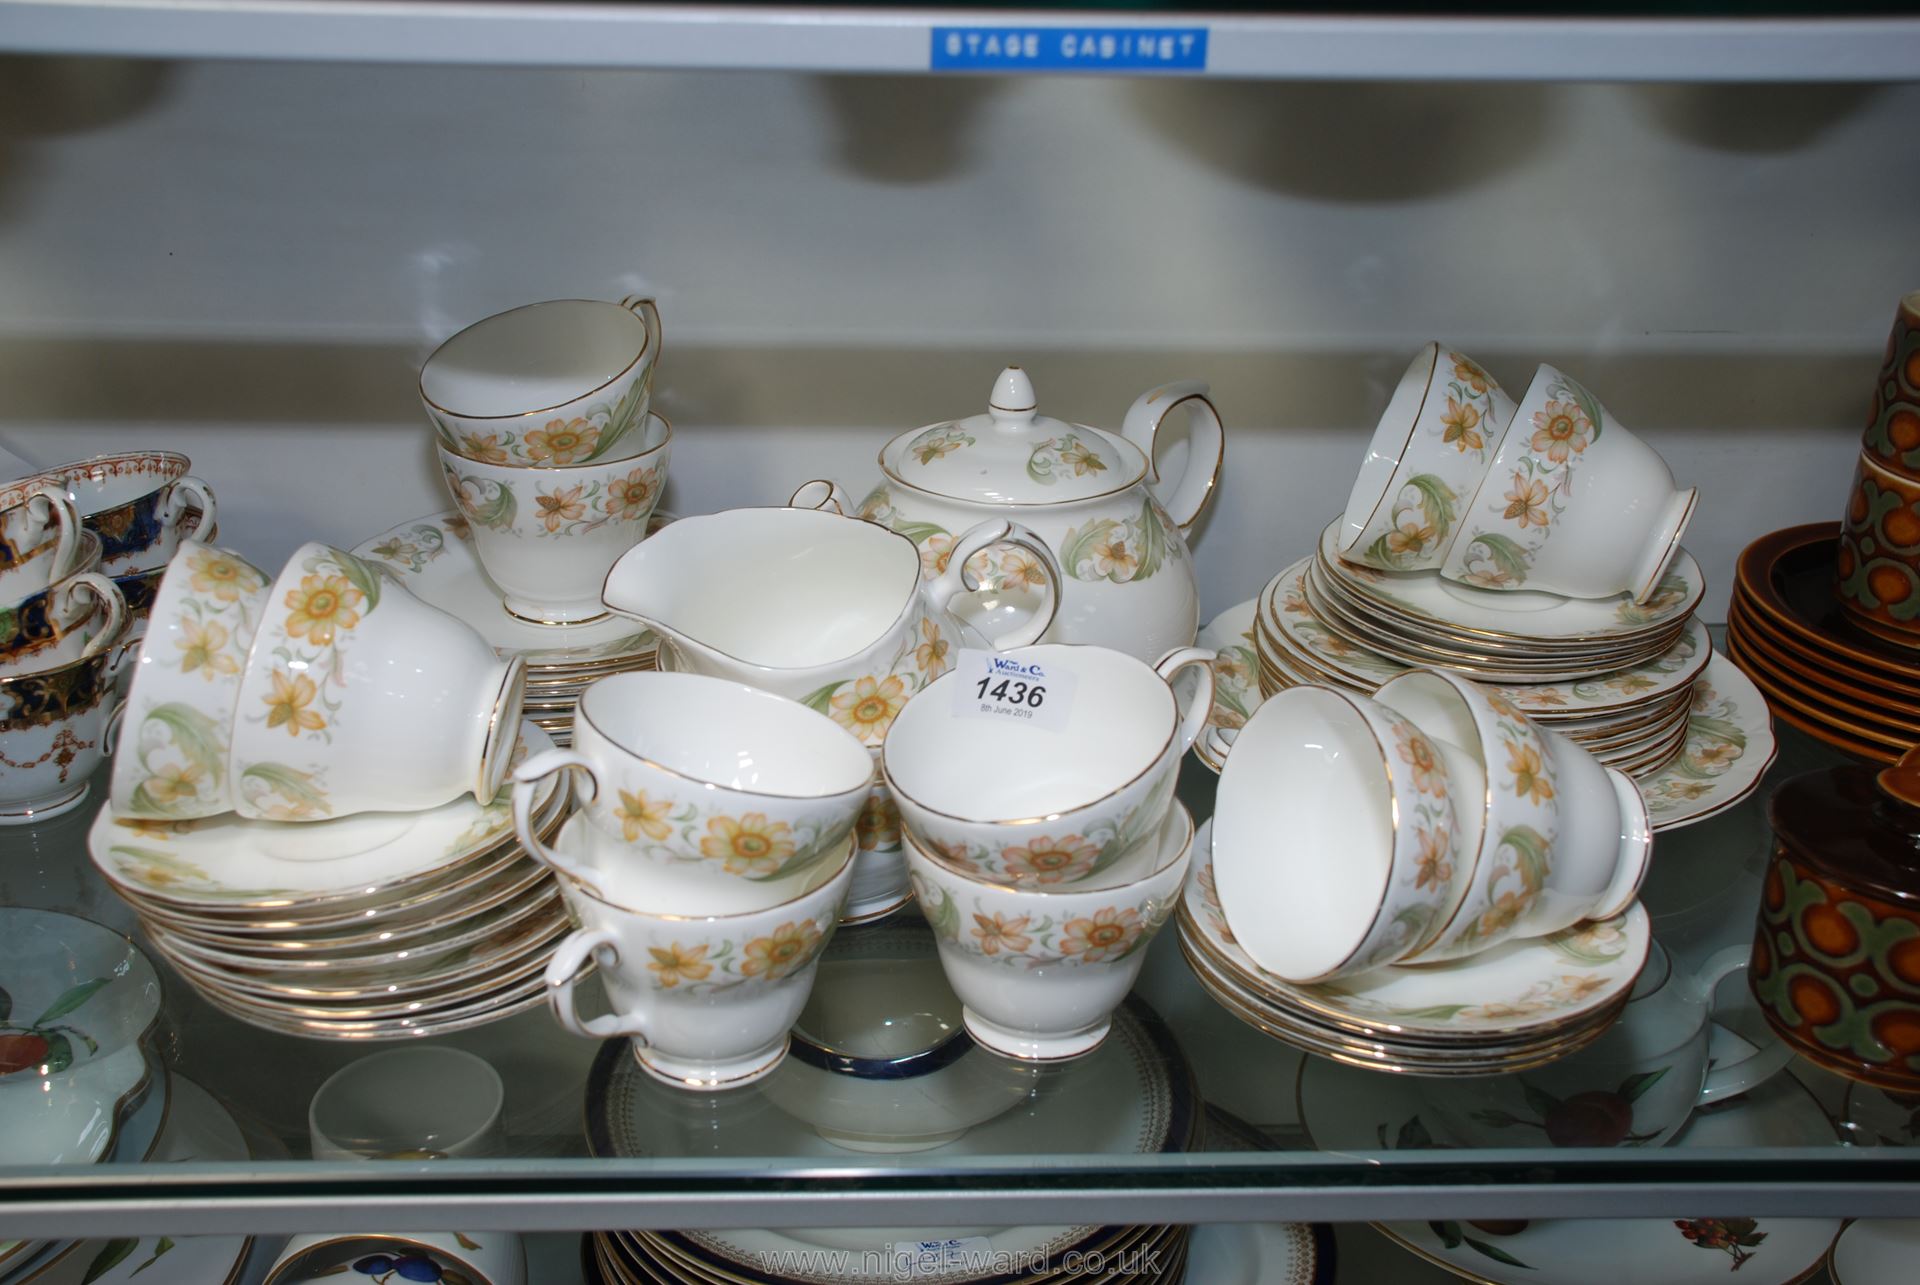 A Duchess Greensleeves Teaset comprising teapot, twelve cups, saucers and plates.